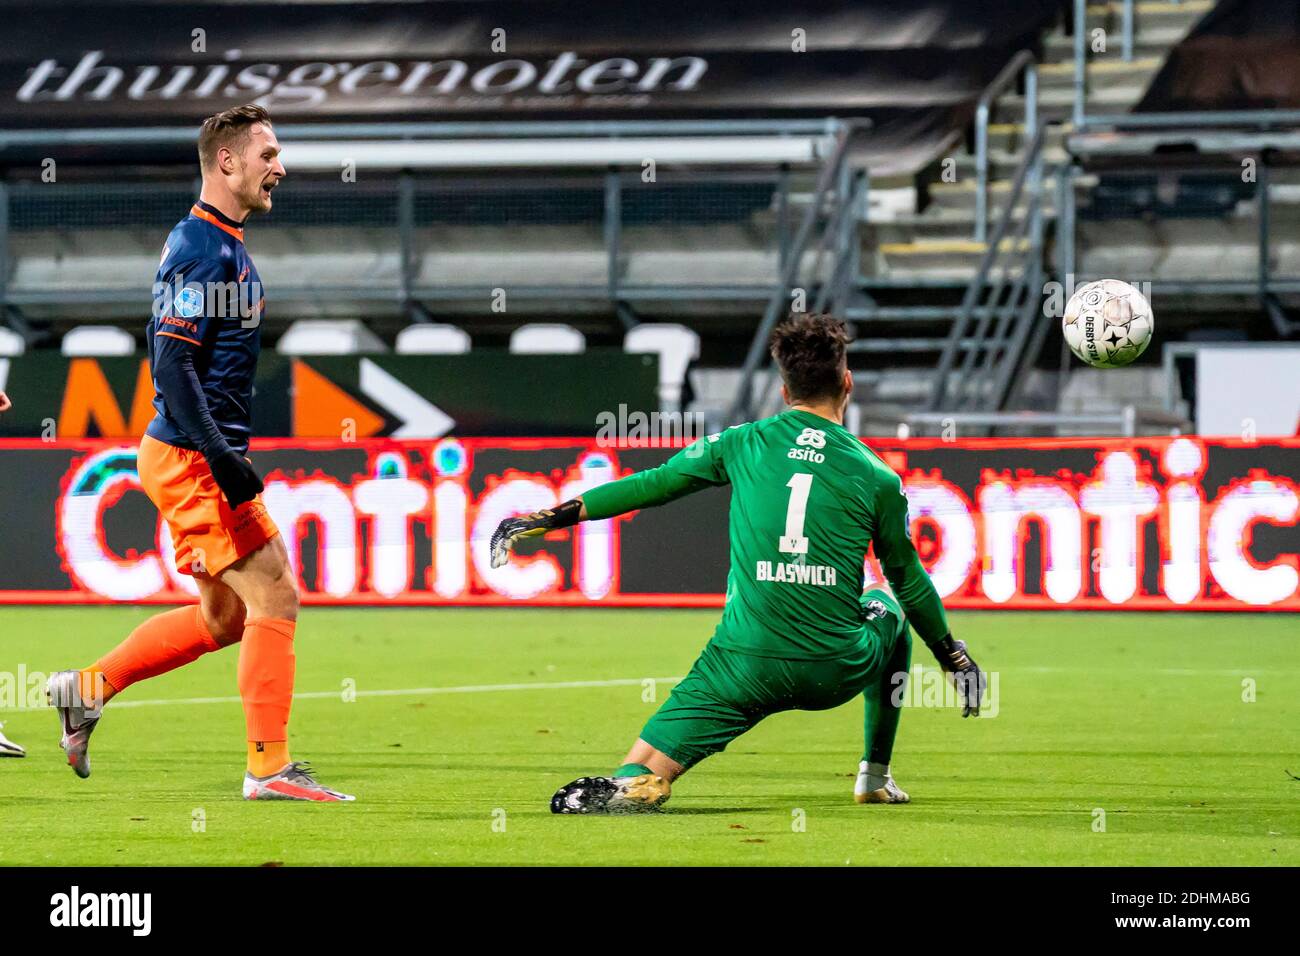 ALMELO, Netherlands. 11th Dec, 2020. football, Dutch eredivisie, season 2020/2021, Fortuna Sittard player Sebastian Polter scores the 0-2 during the match Heracles - Fortuna Sittard Credit: Pro Shots/Alamy Live News Stock Photo